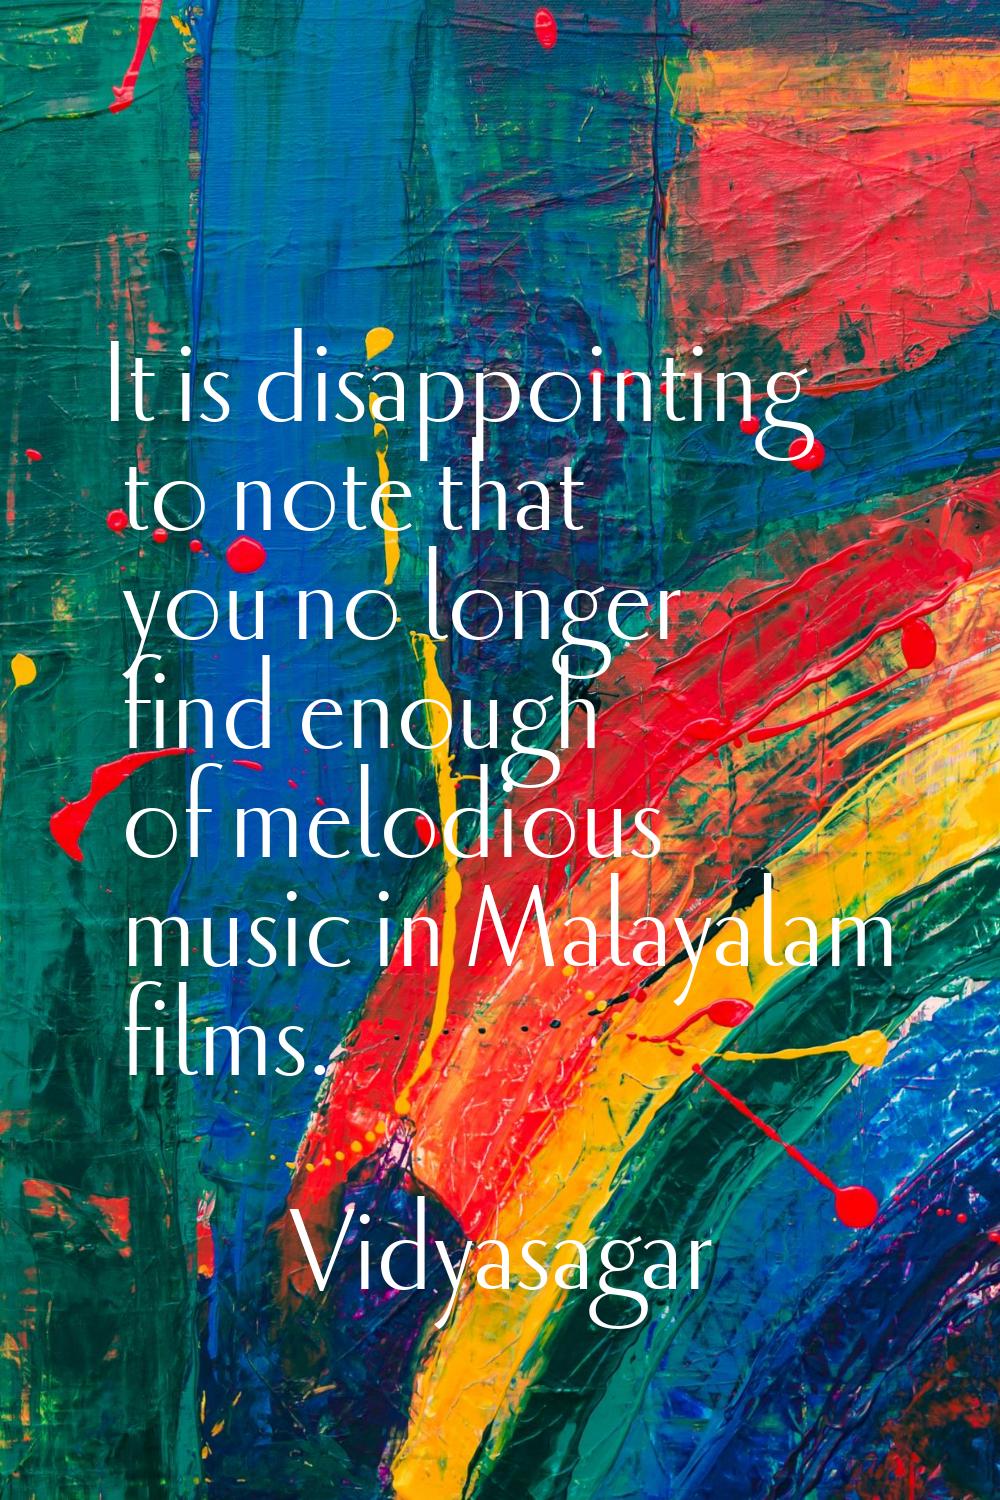 It is disappointing to note that you no longer find enough of melodious music in Malayalam films.